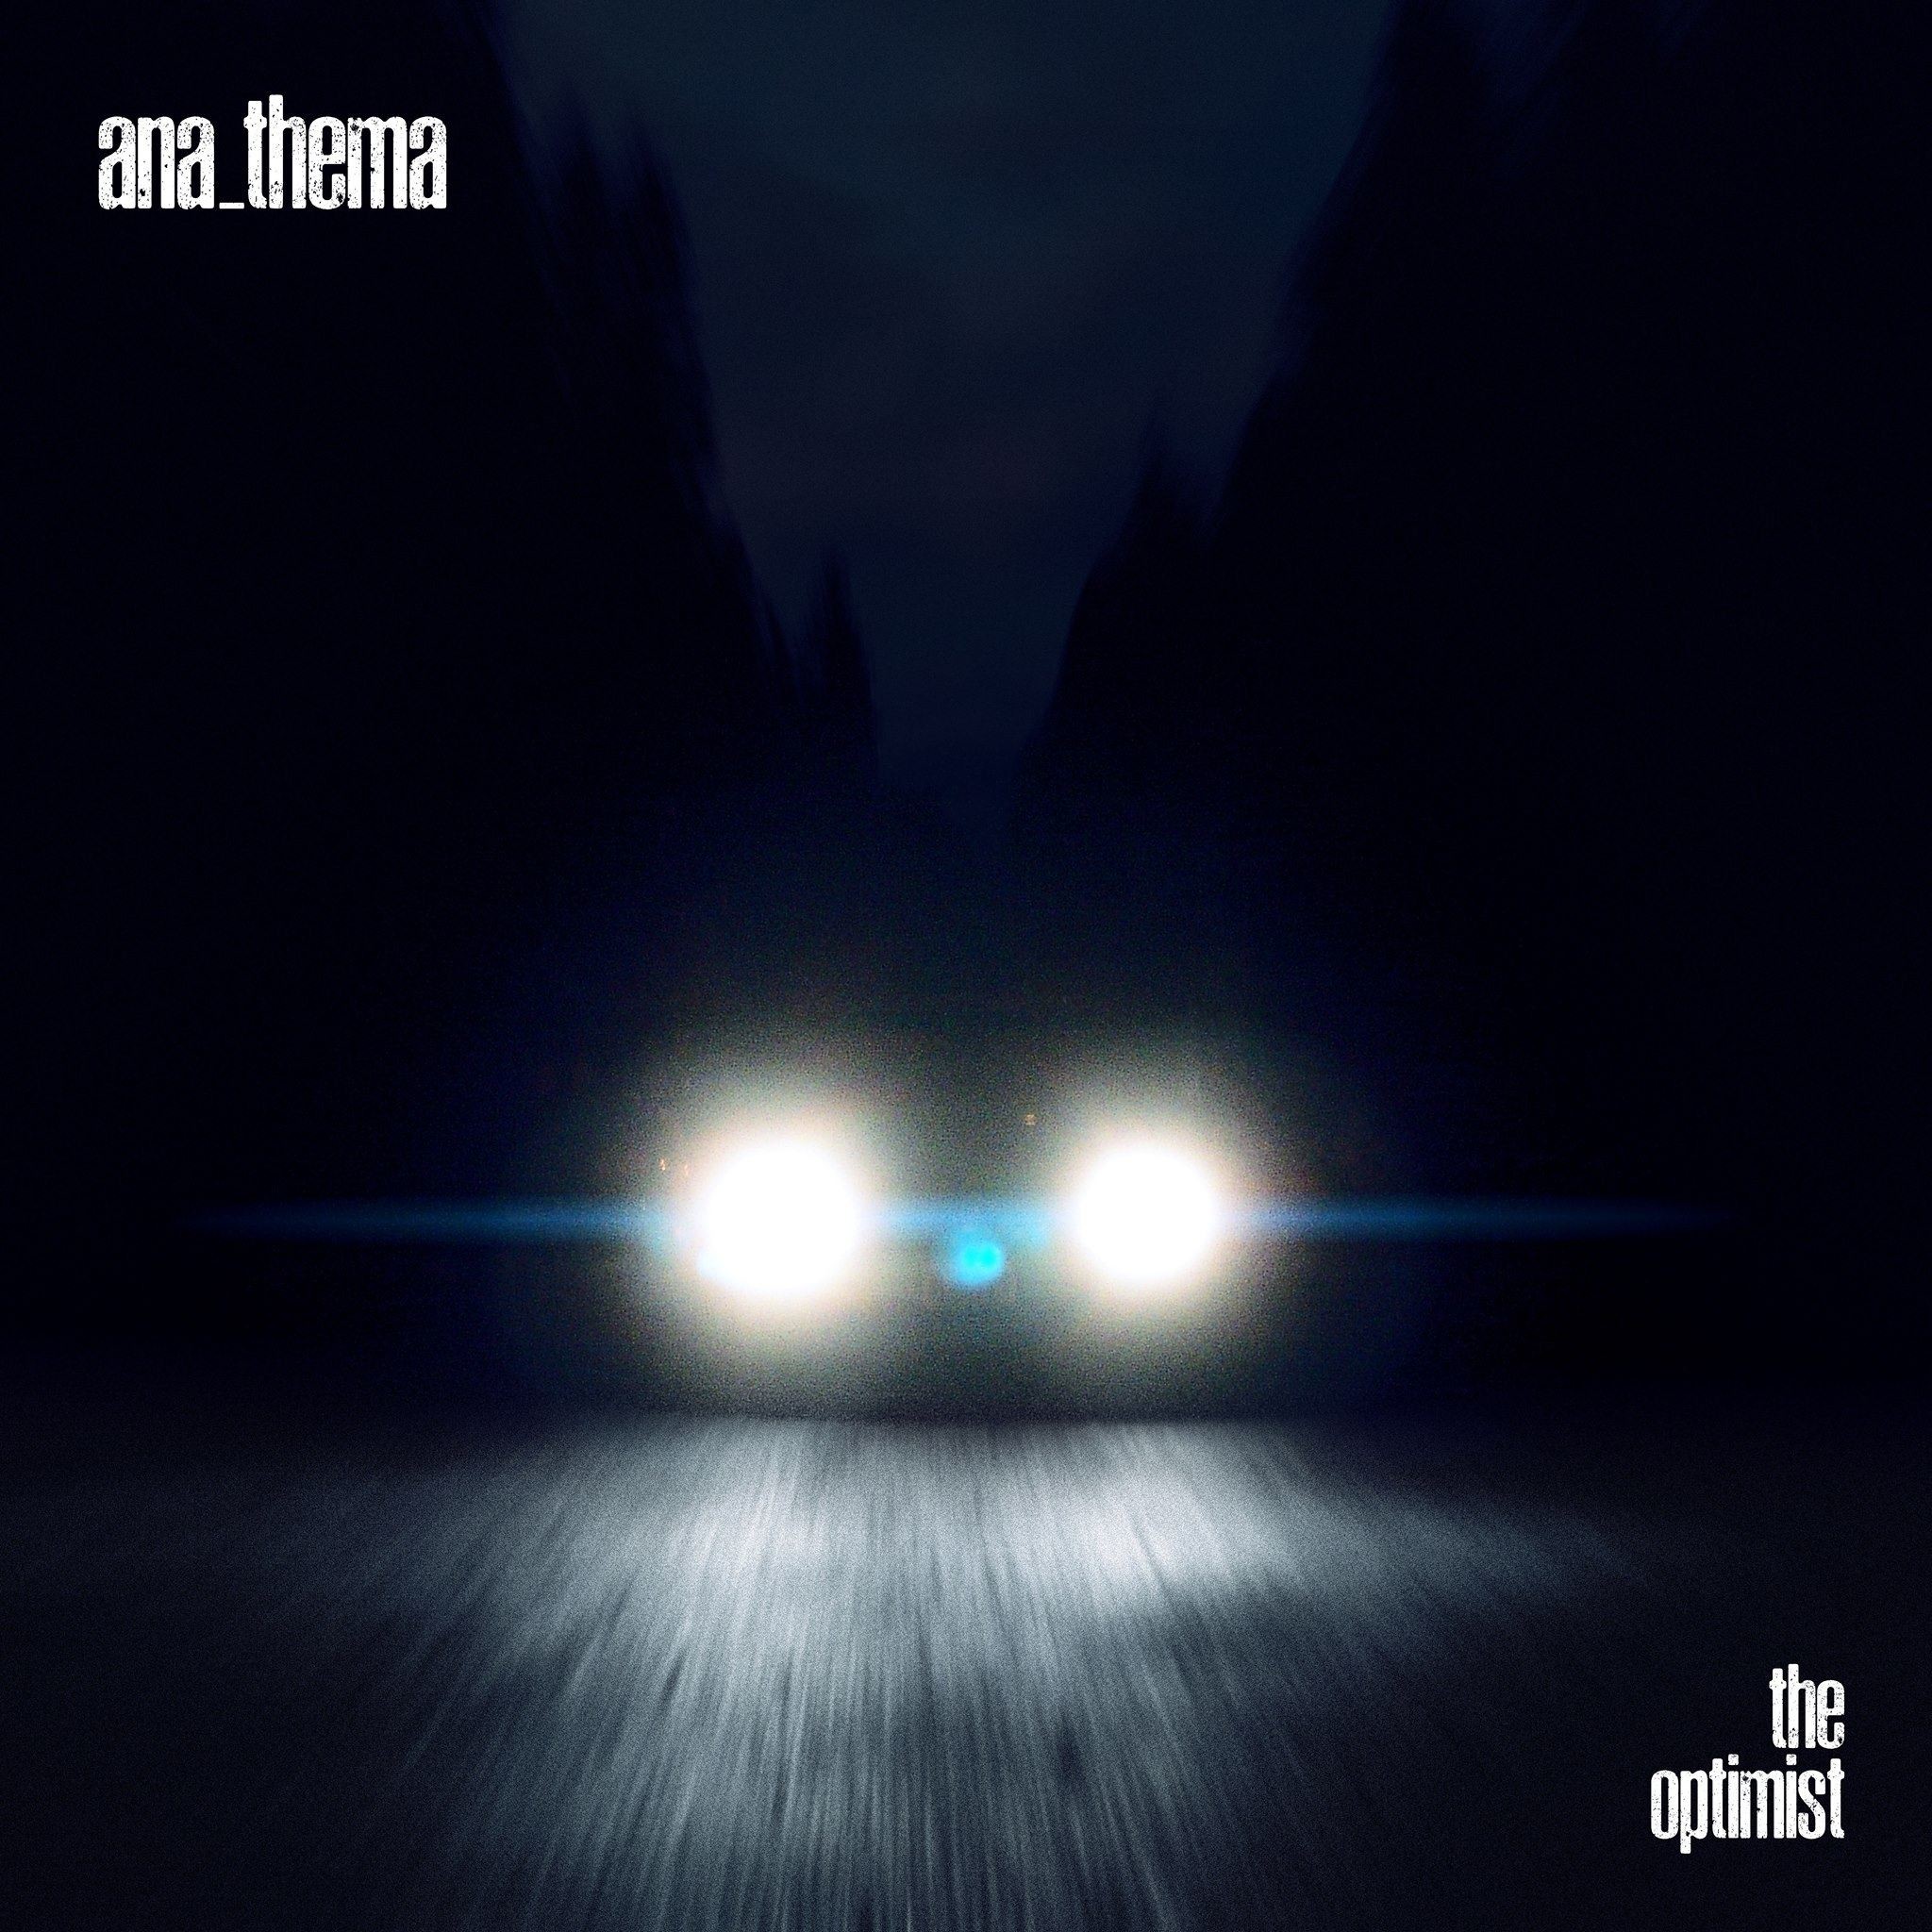 2048x2048 It's been three years since Anathema's Distant Satellites proved to be yet  another critical success for this unique British band.